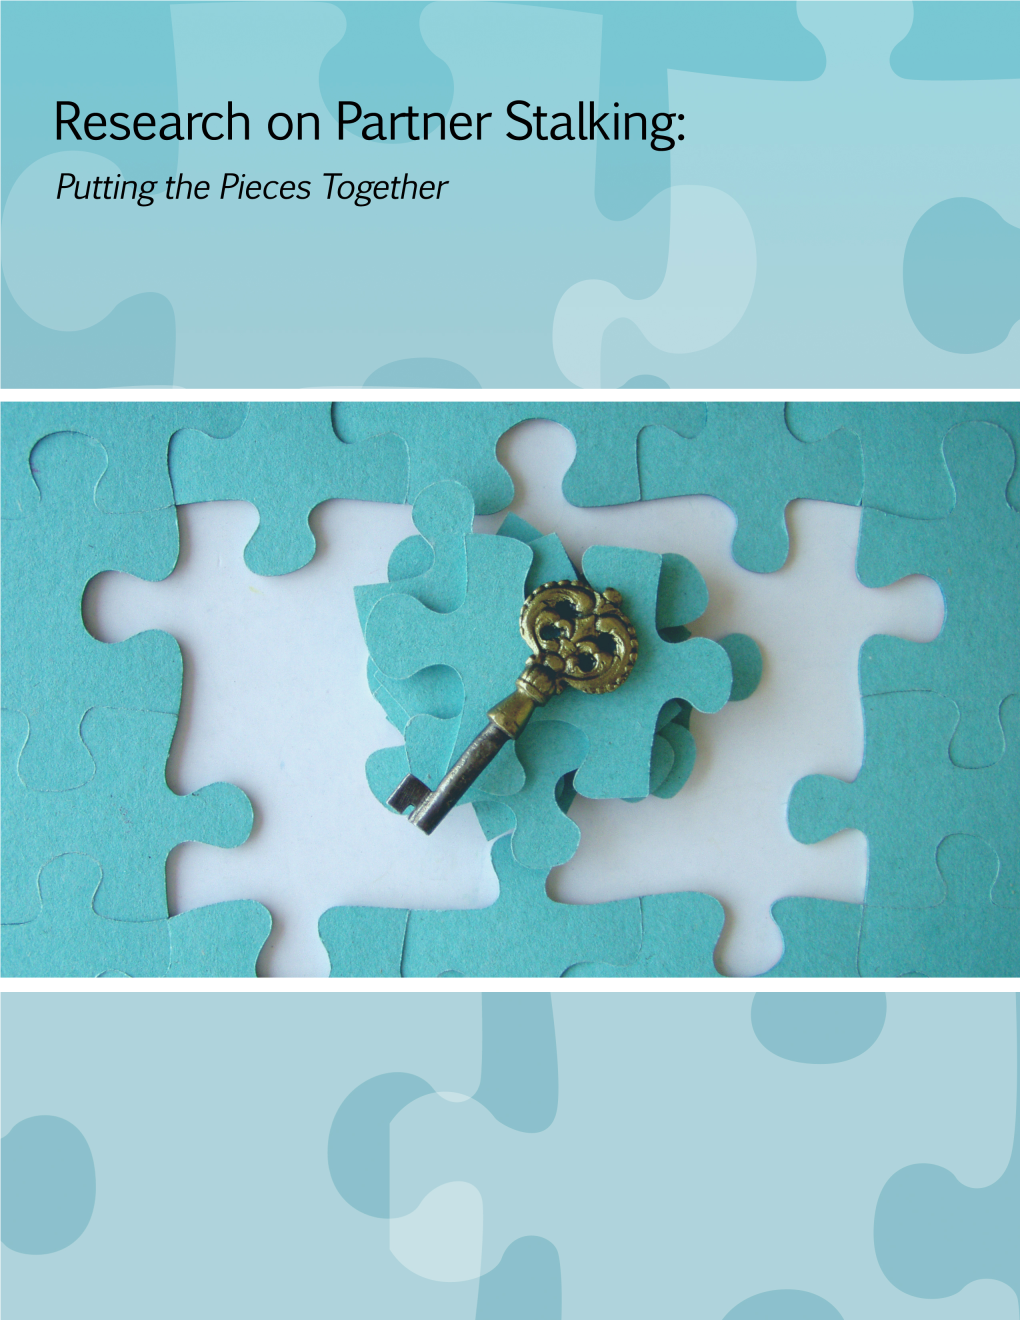 Research on Partner Stalking: Putting the Pieces Together